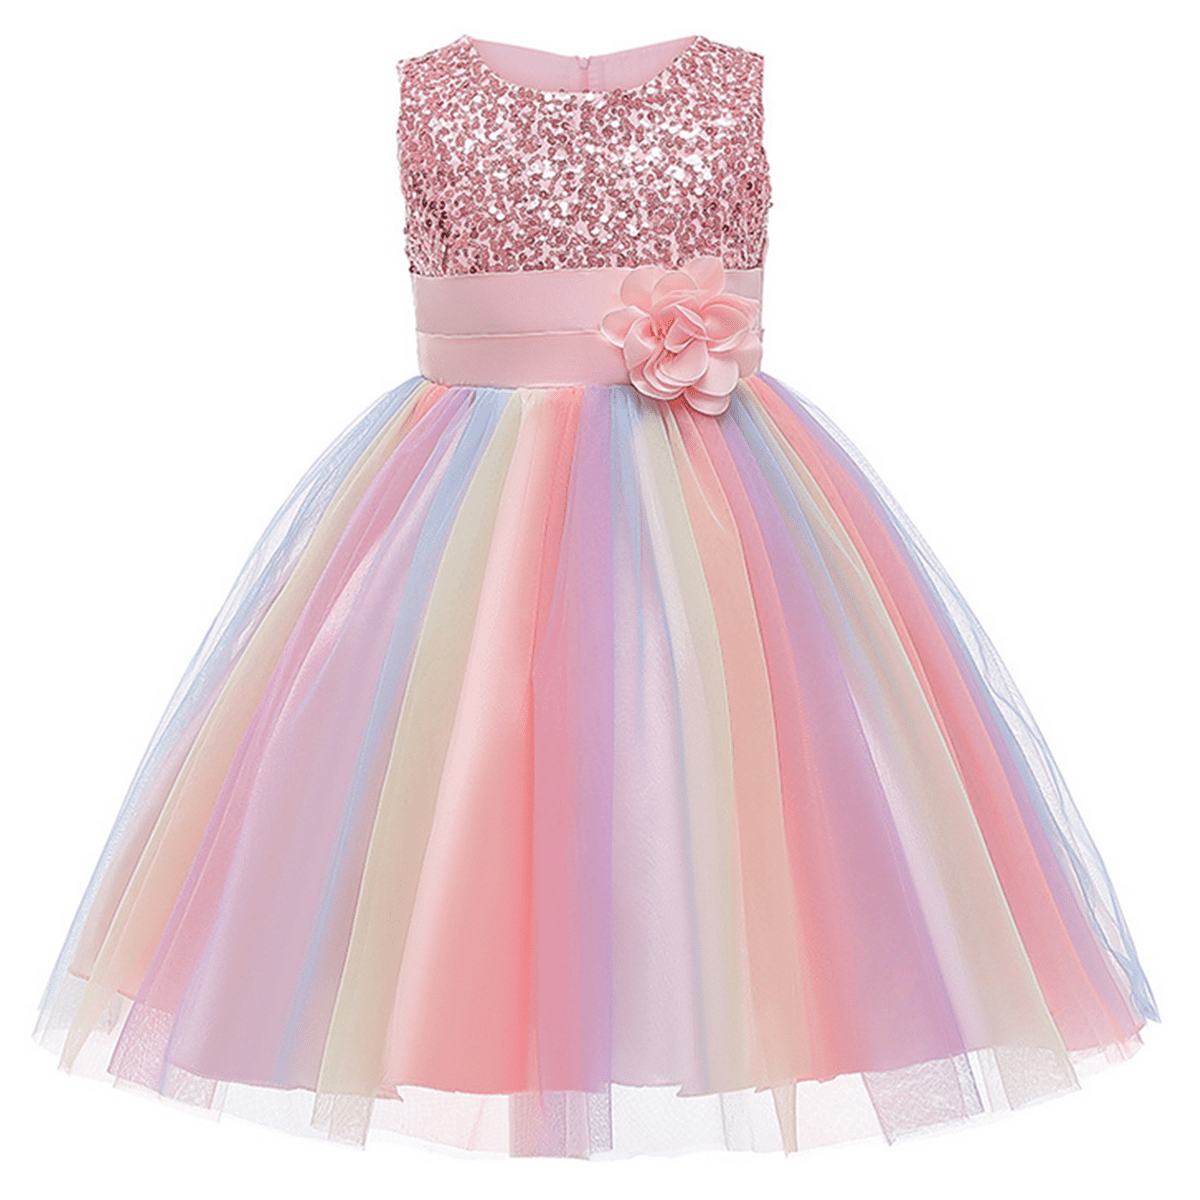 New Pink Two Piece Flower Girls Pageant Gowns Formal Birthday Party Kids Dresses 